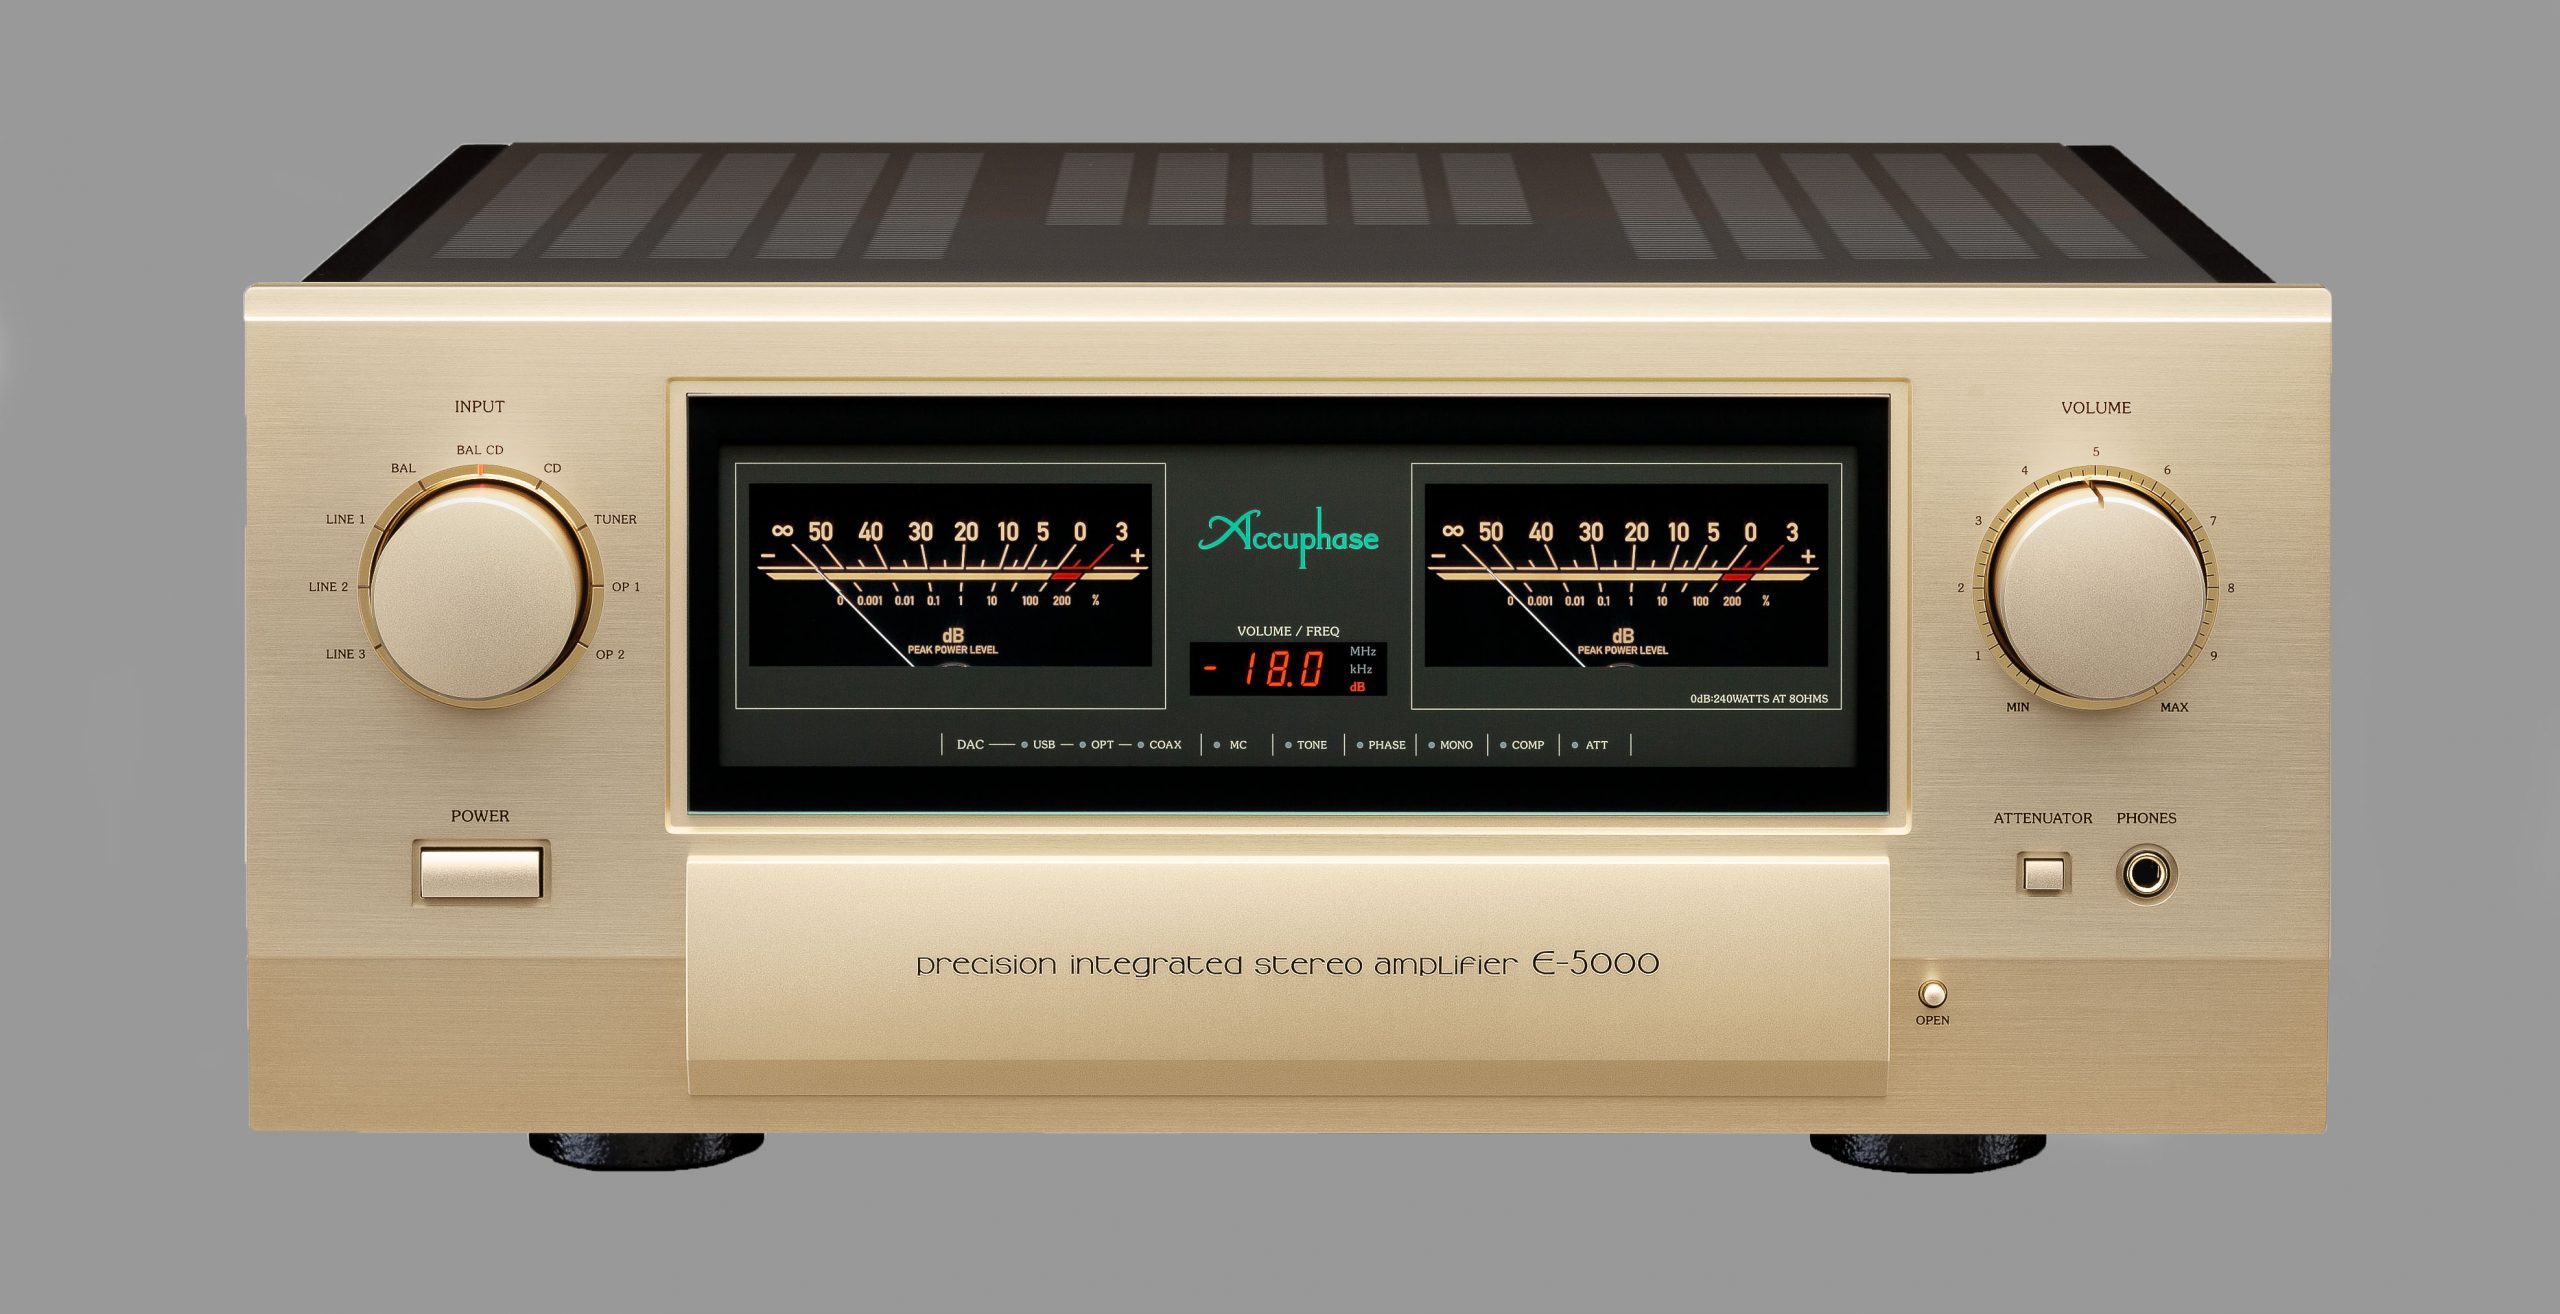 Accuphase E-5000 versterker